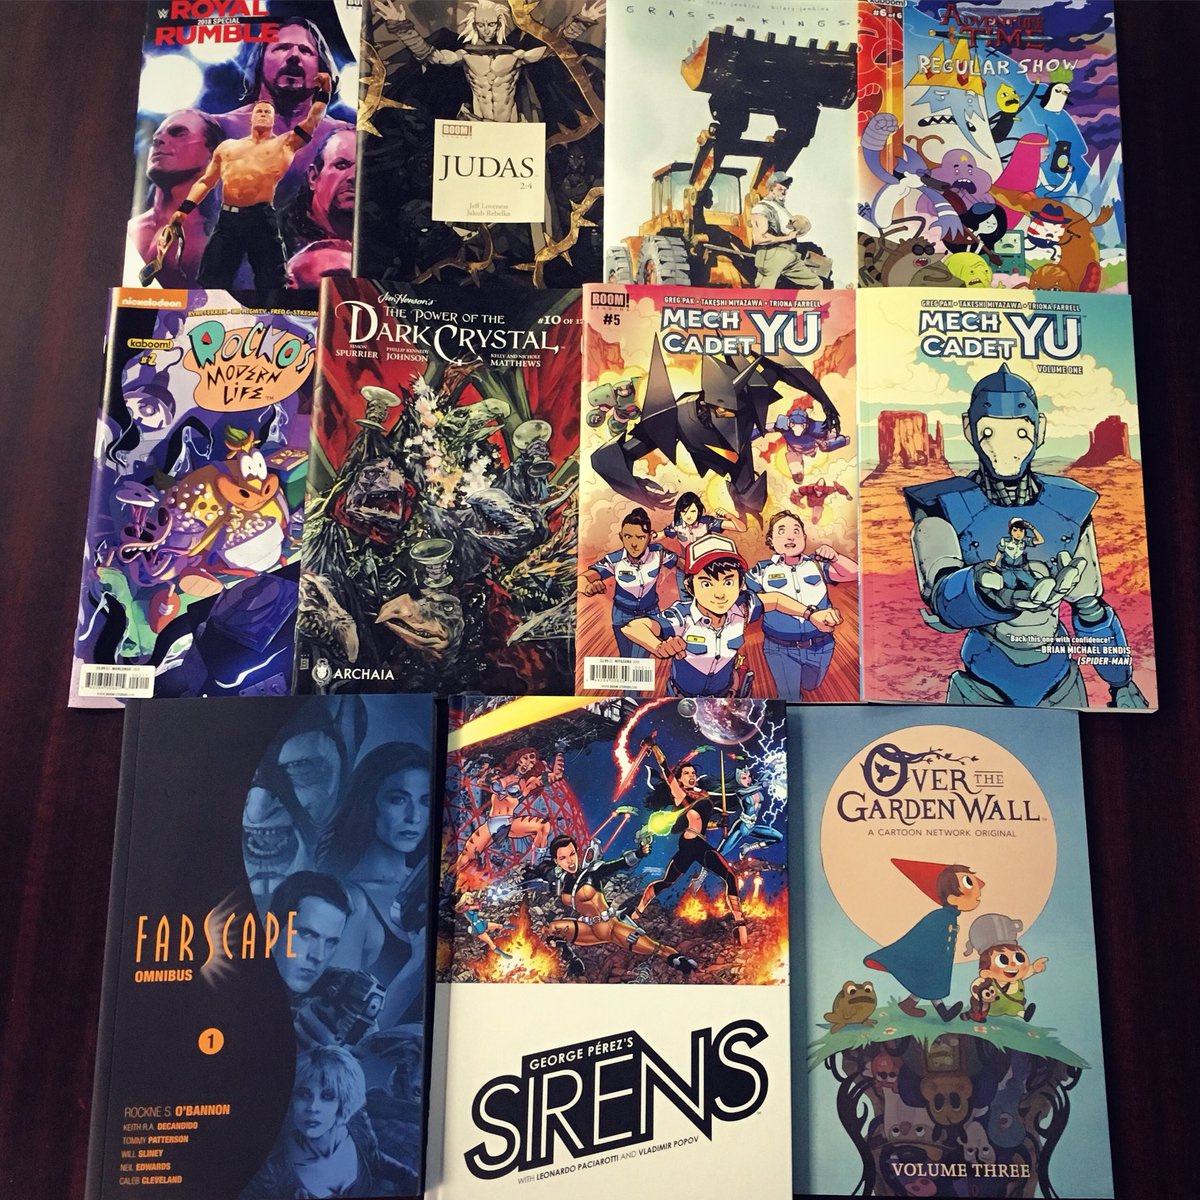 We’ve got a lot of fresh comics coming your way this #NCBD! What’s on your pull list this week?